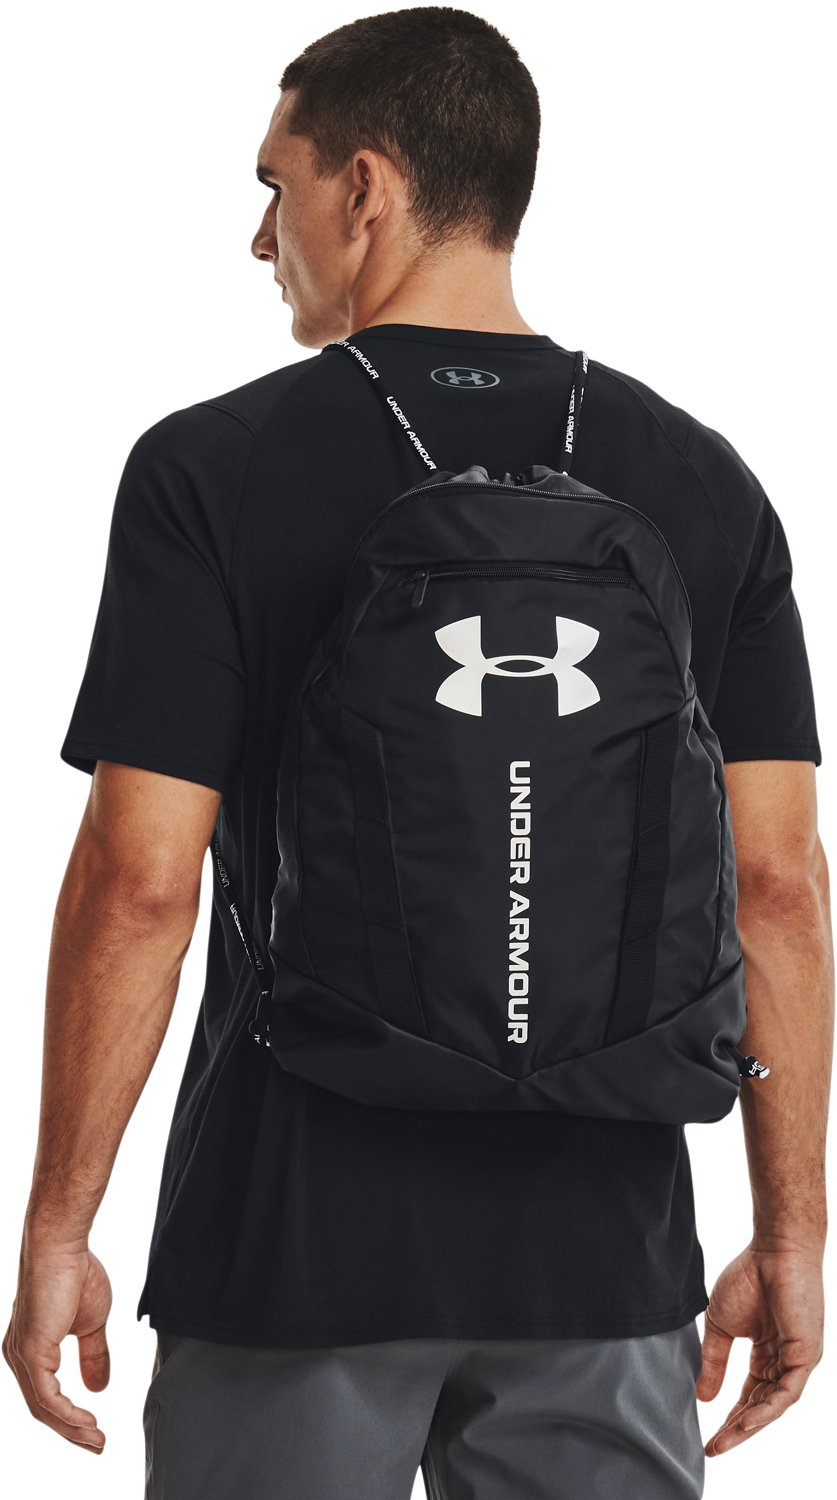 Under Armour UA Undeniable Sackpack Drawstring Backpack Sack Pack